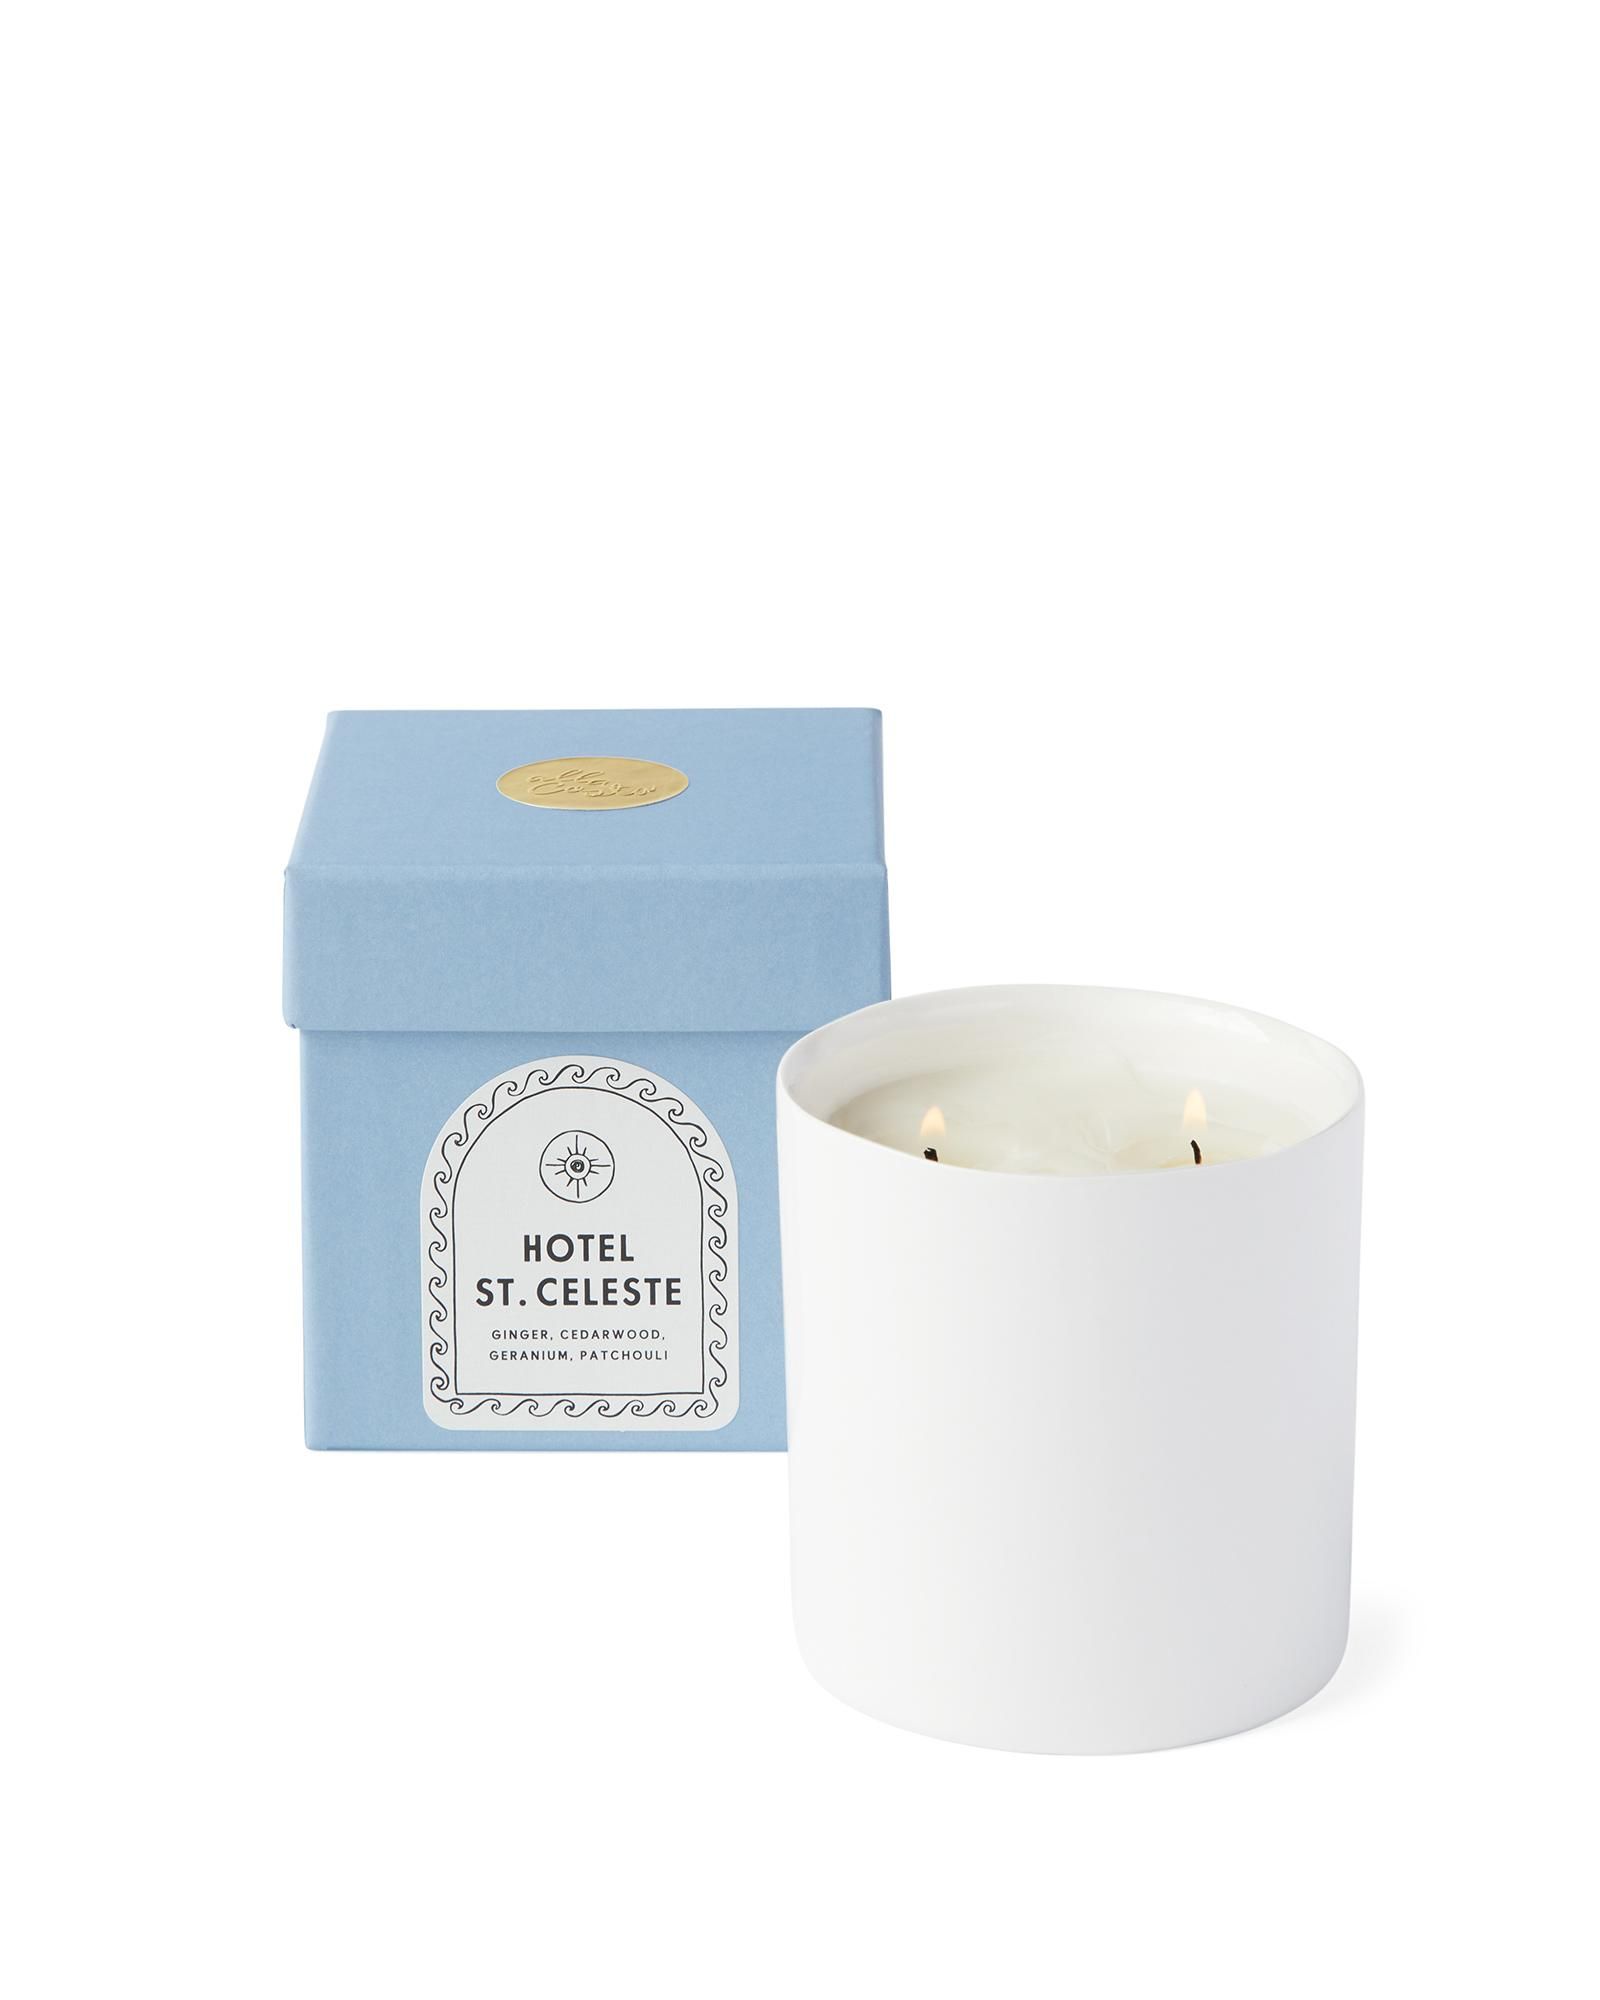 Hotel St. Celeste Candle by Alla Costa | Serena and Lily